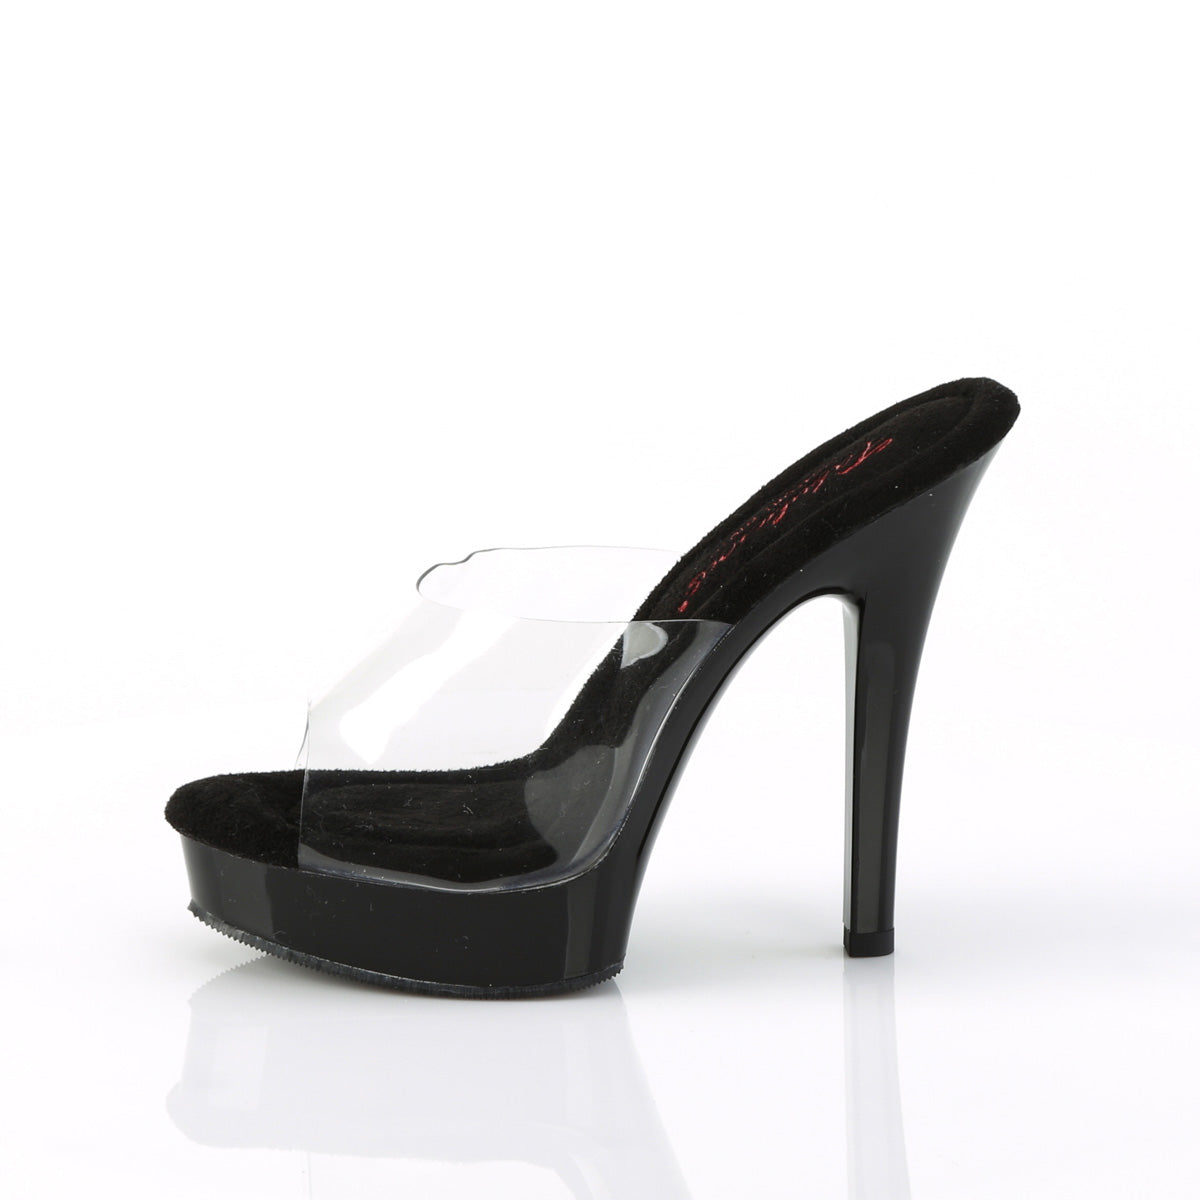 MAJESTY-501 Fabulicious Clear/Black Shoes [Sexy Shoes]